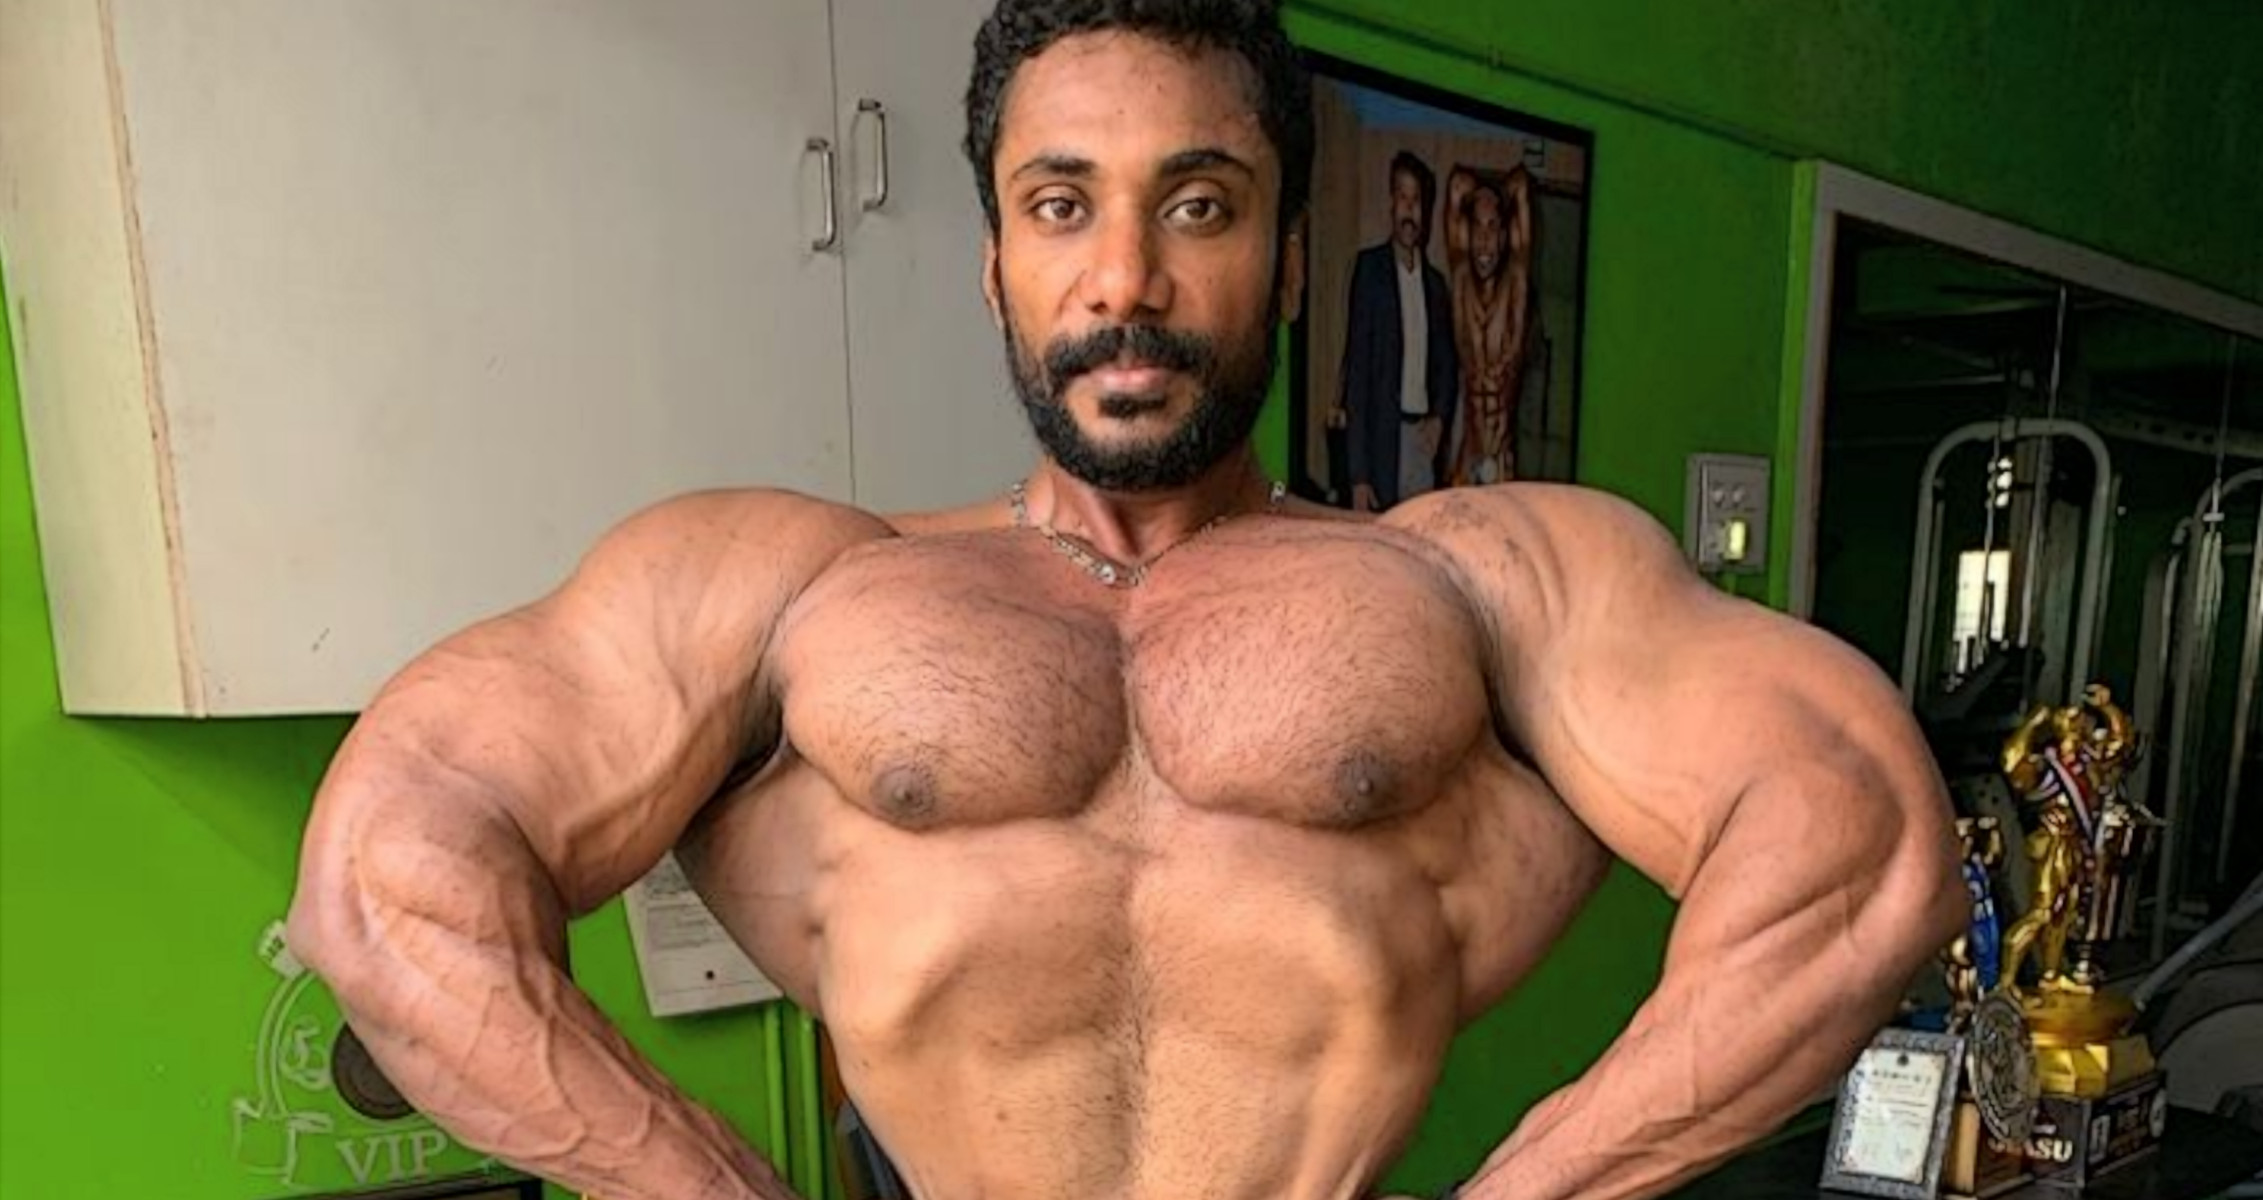 Indian Bodybuilding - Home of Indian Bodybuilding and Fitness